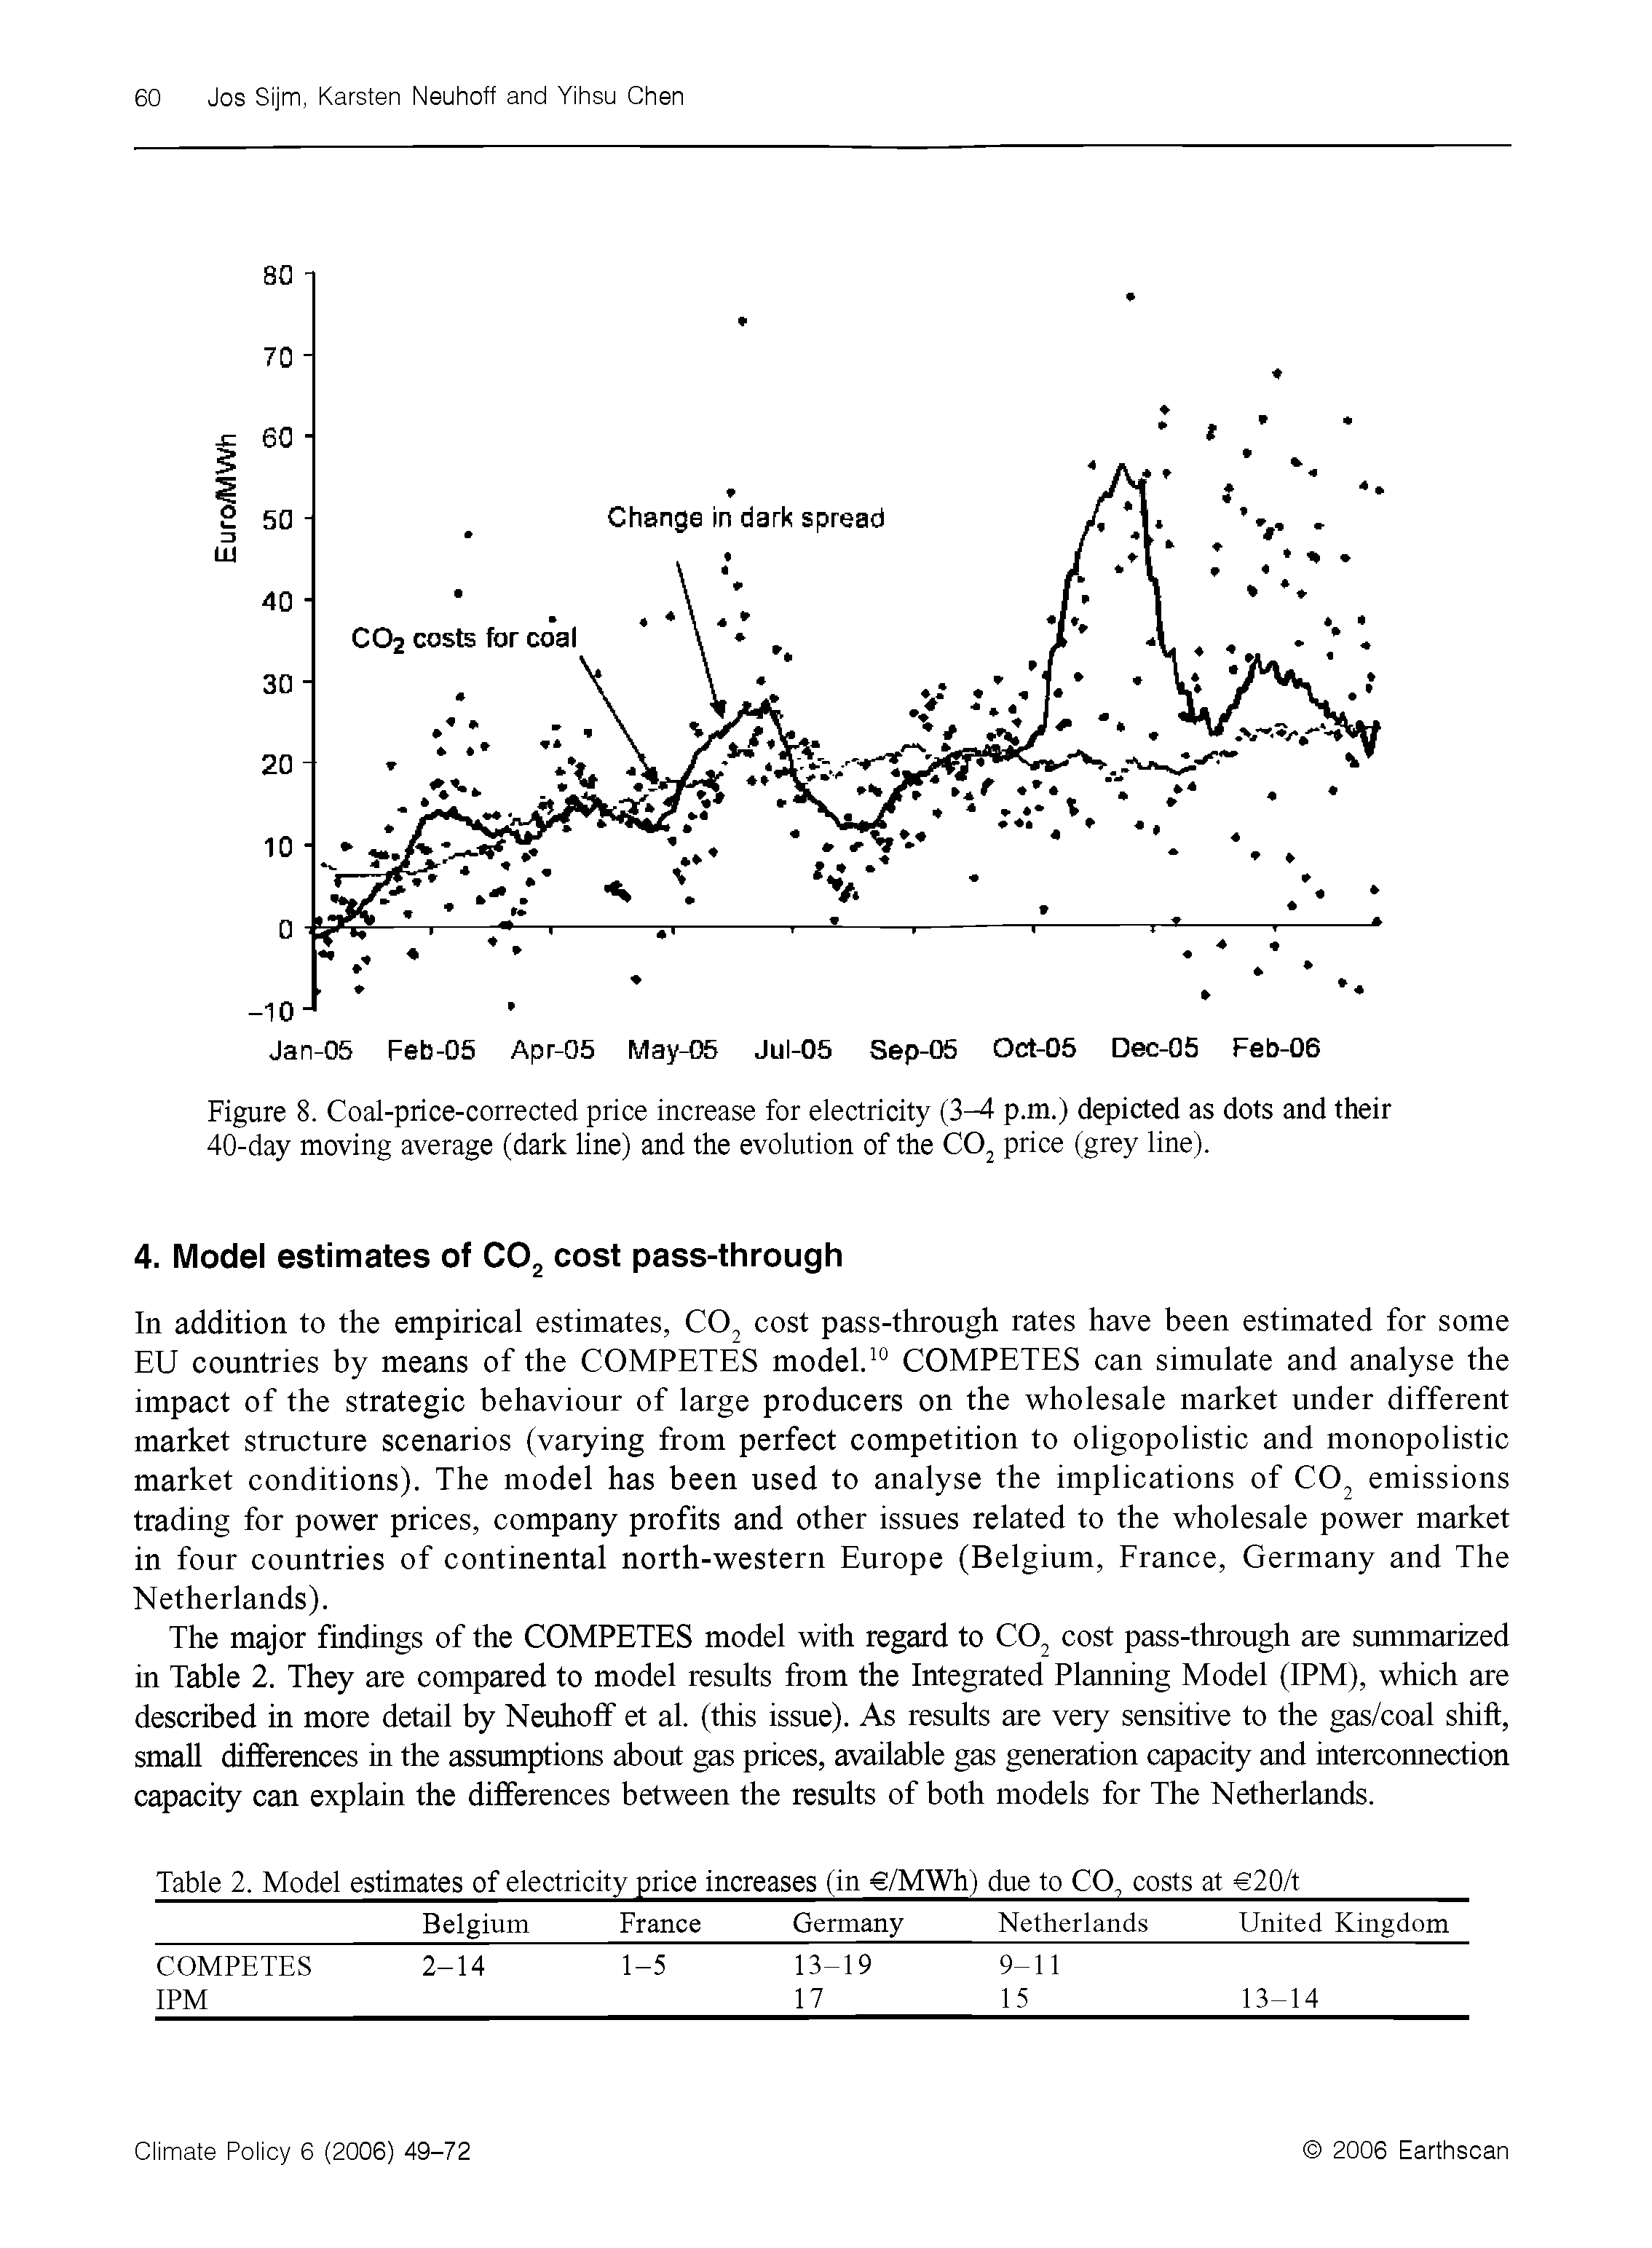 Figure 8. Coal-price-corrected price increase for electricity (3 1 p.m.) depicted as dots and their 40-day moving average (dark line) and the evolution of the C02 price (grey line).